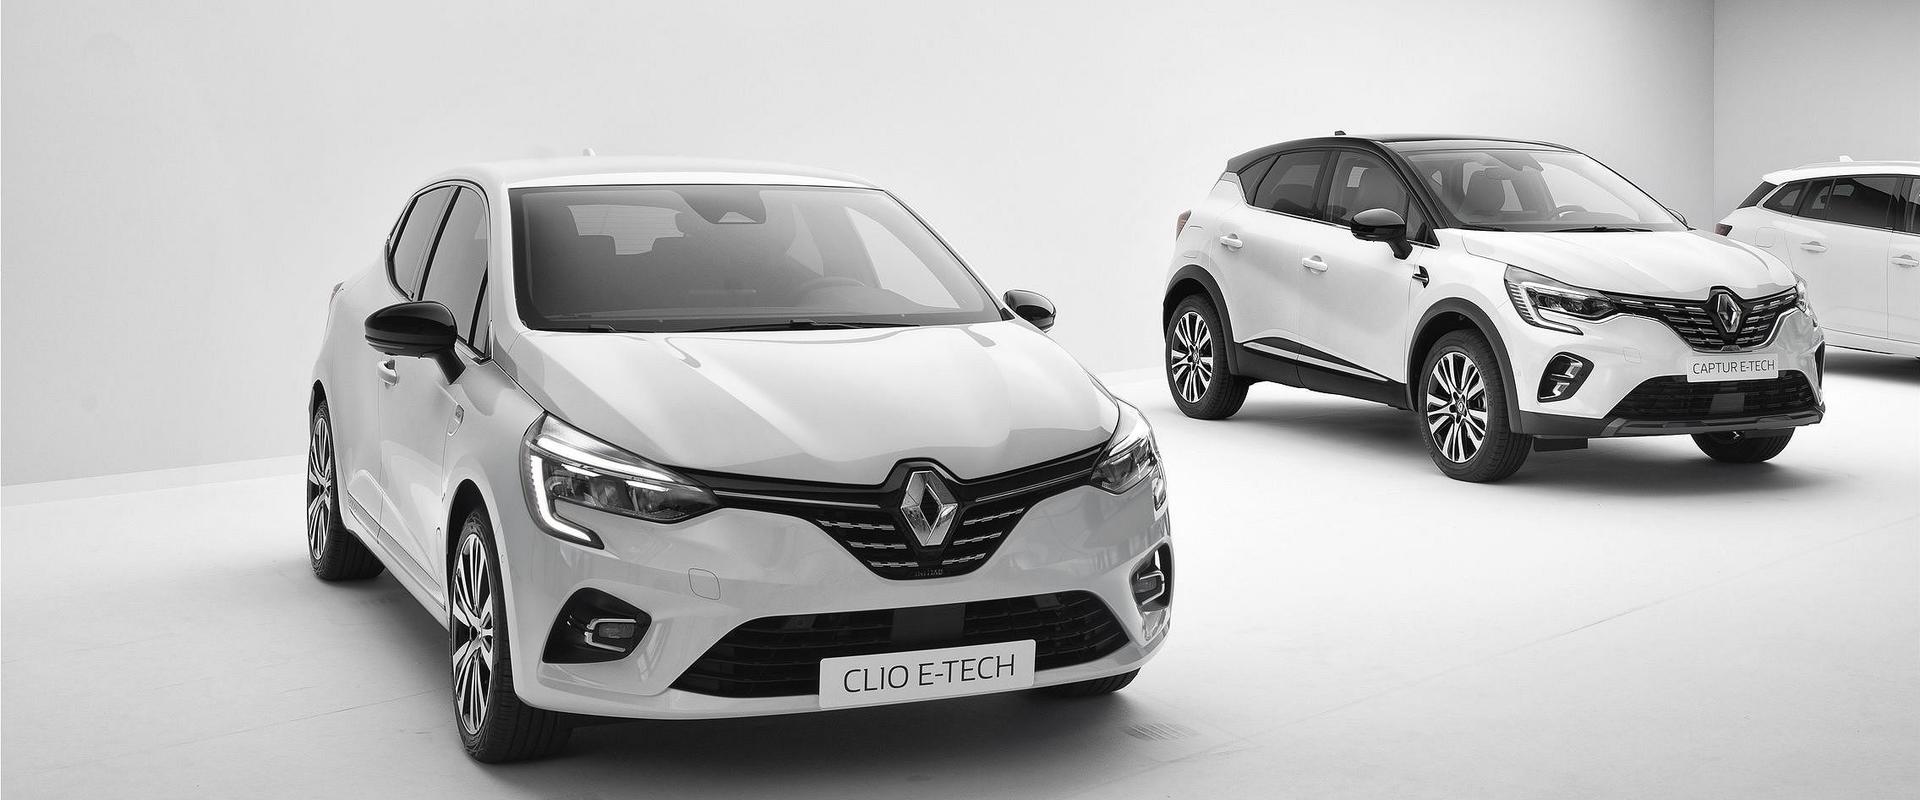 /assets/components/phpthumbof/cache/renault-clio-e-tech-premiere-edition-2020-car-m05.5ea4a88f2b06c12b5db36e2ad60576e0.jpg